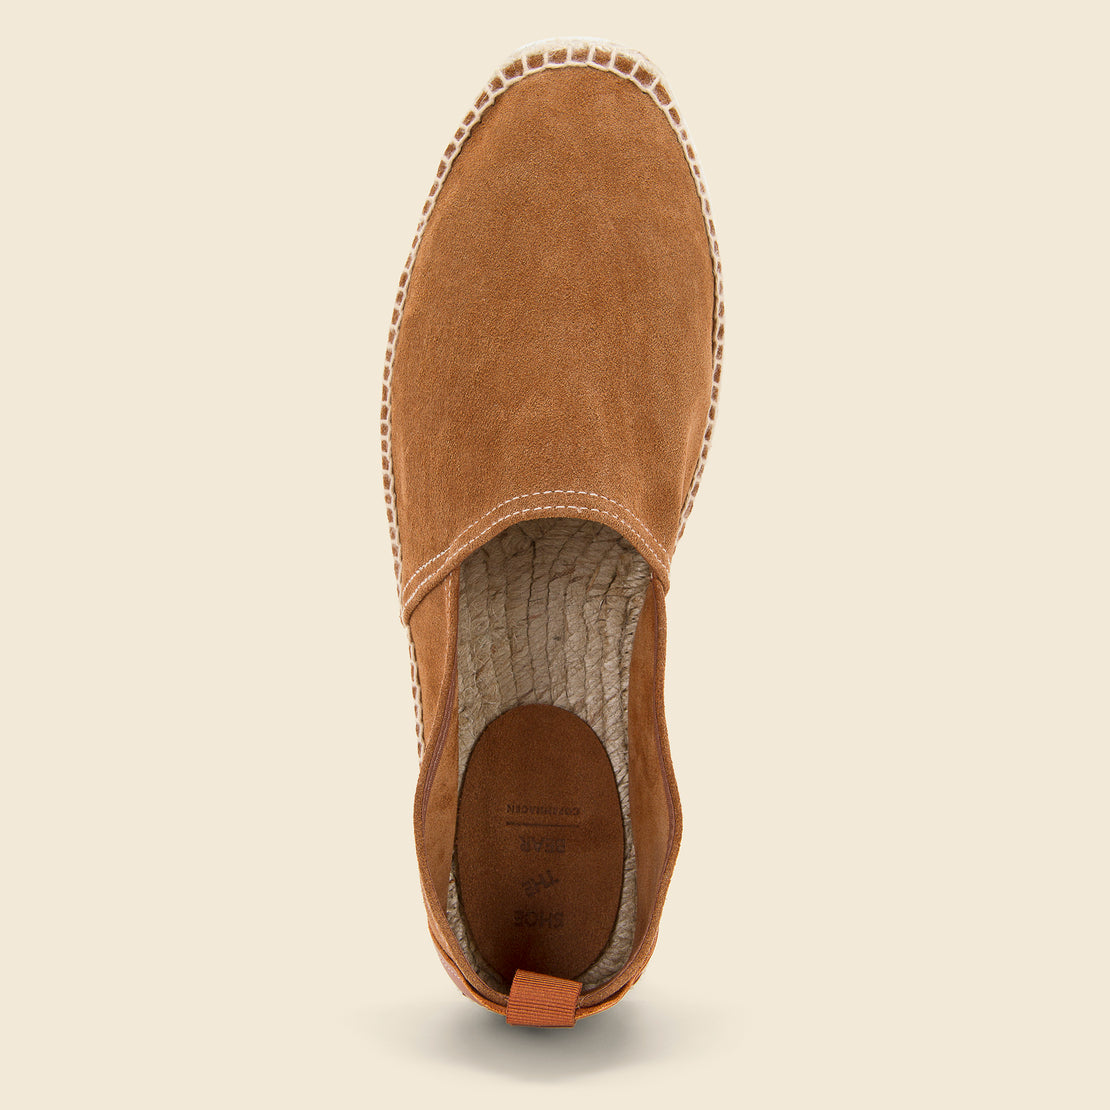 Montauk Slip On - Tan - Shoe the Bear - STAG Provisions - Shoes - Athletic